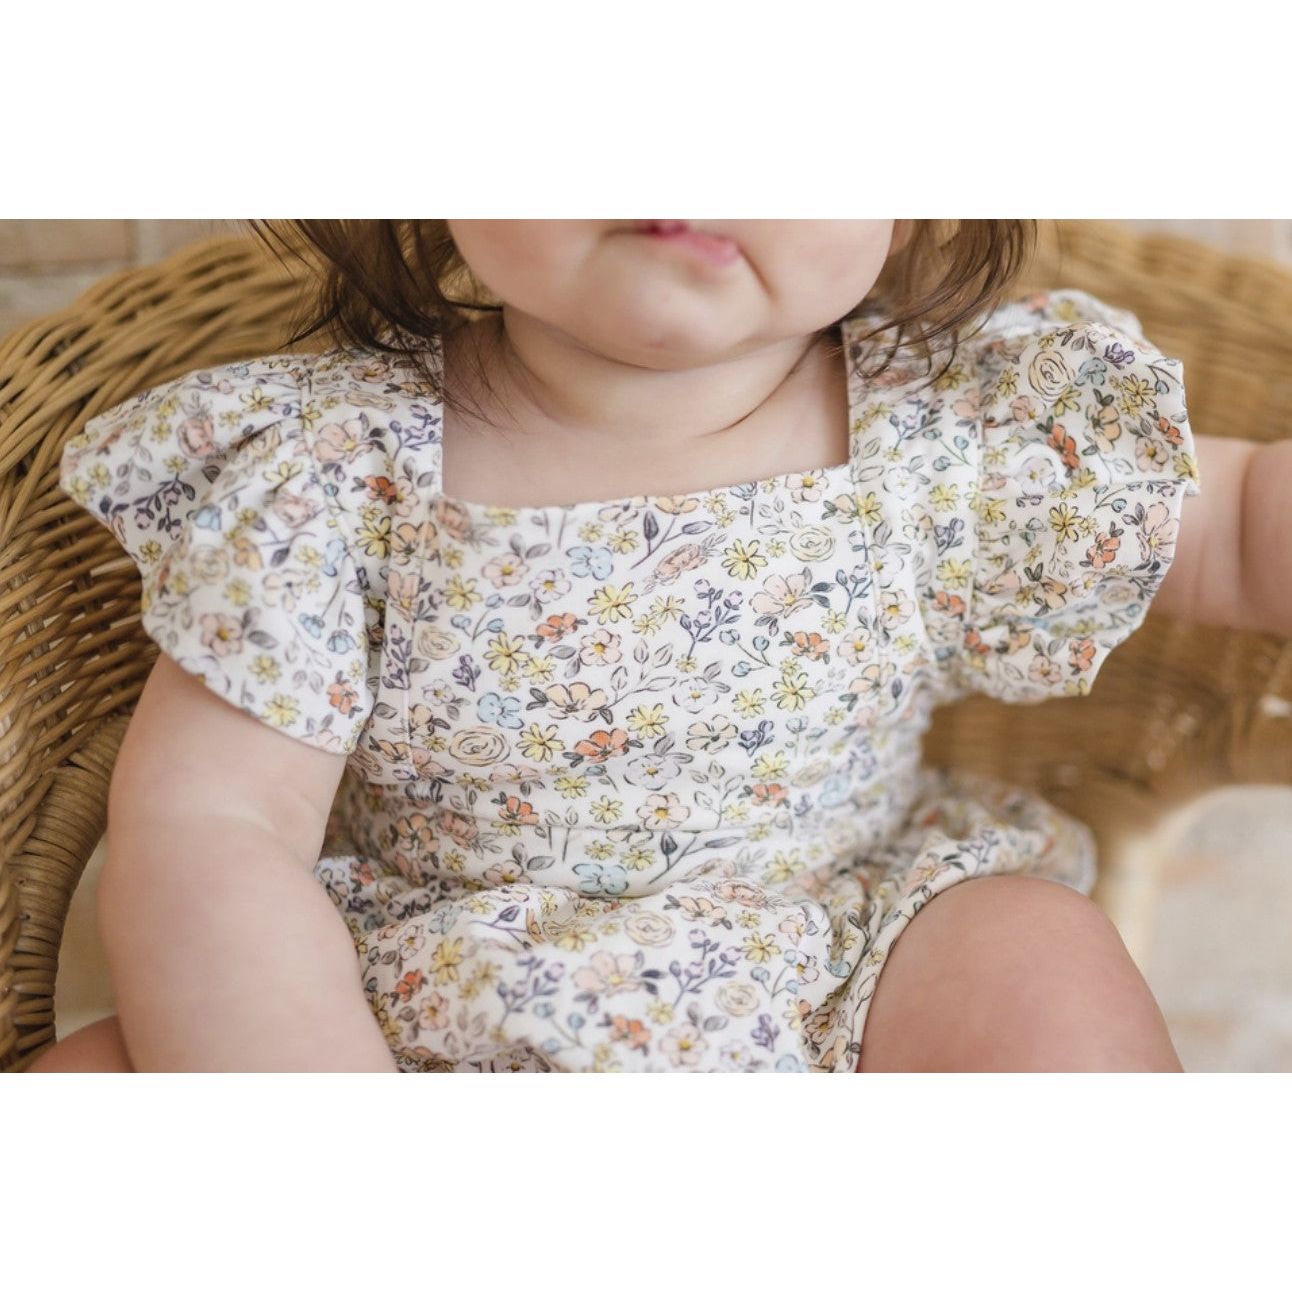 up close view of baby girl wearing white ruffle sleeve bubble with floral print